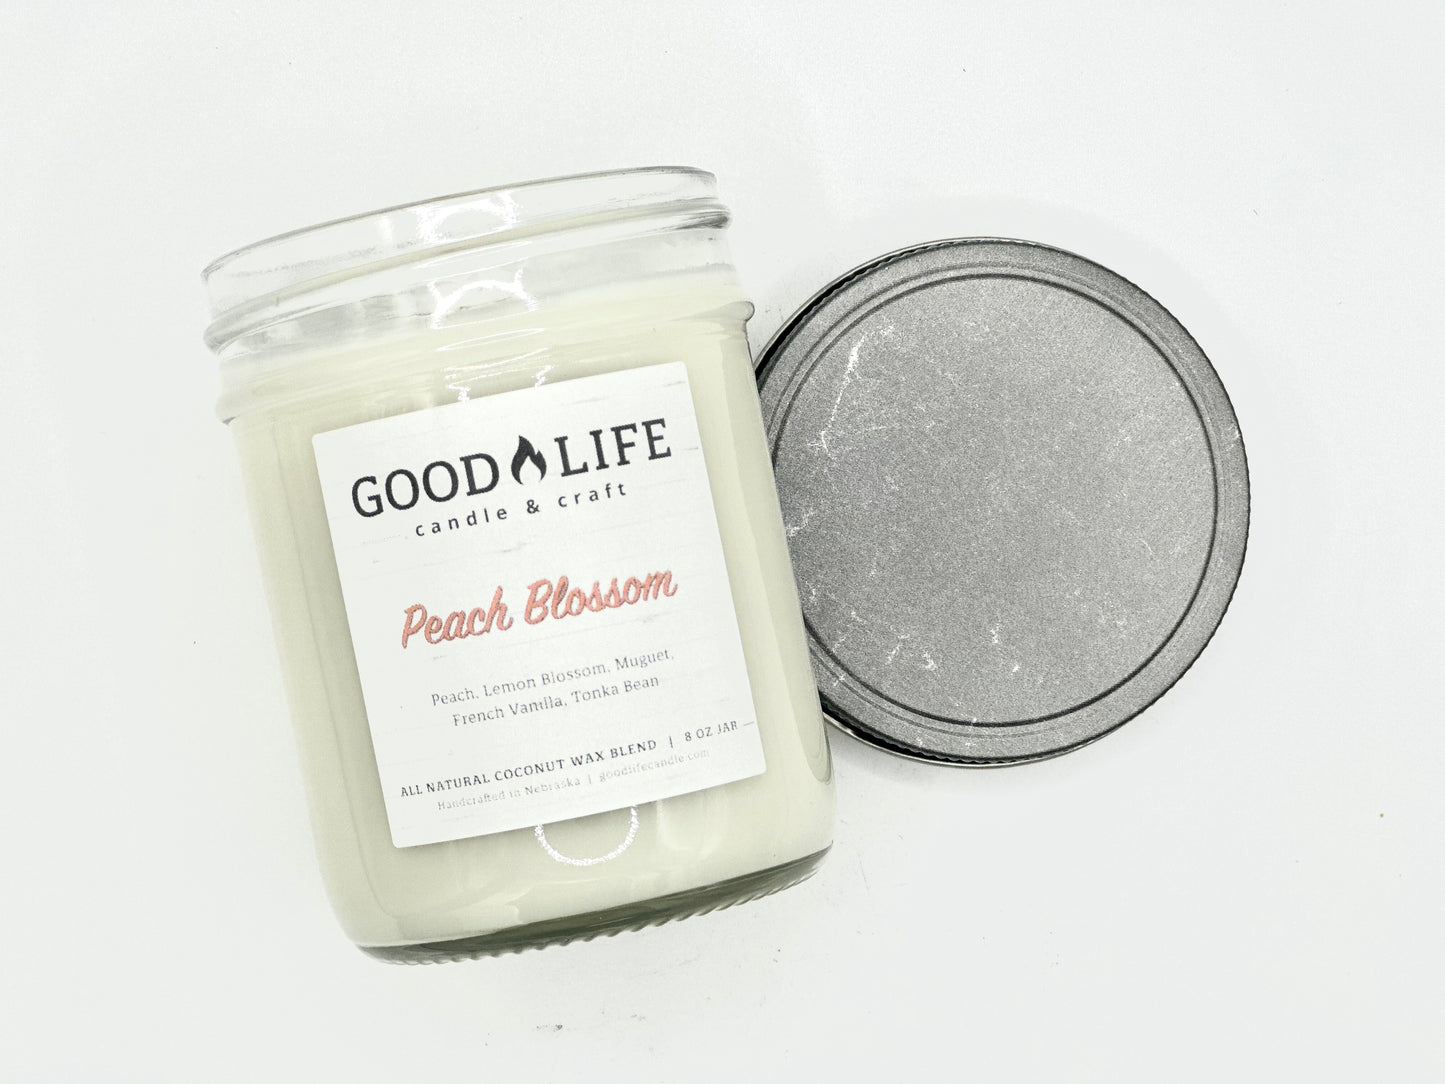 Peach Blossom Scented Candle